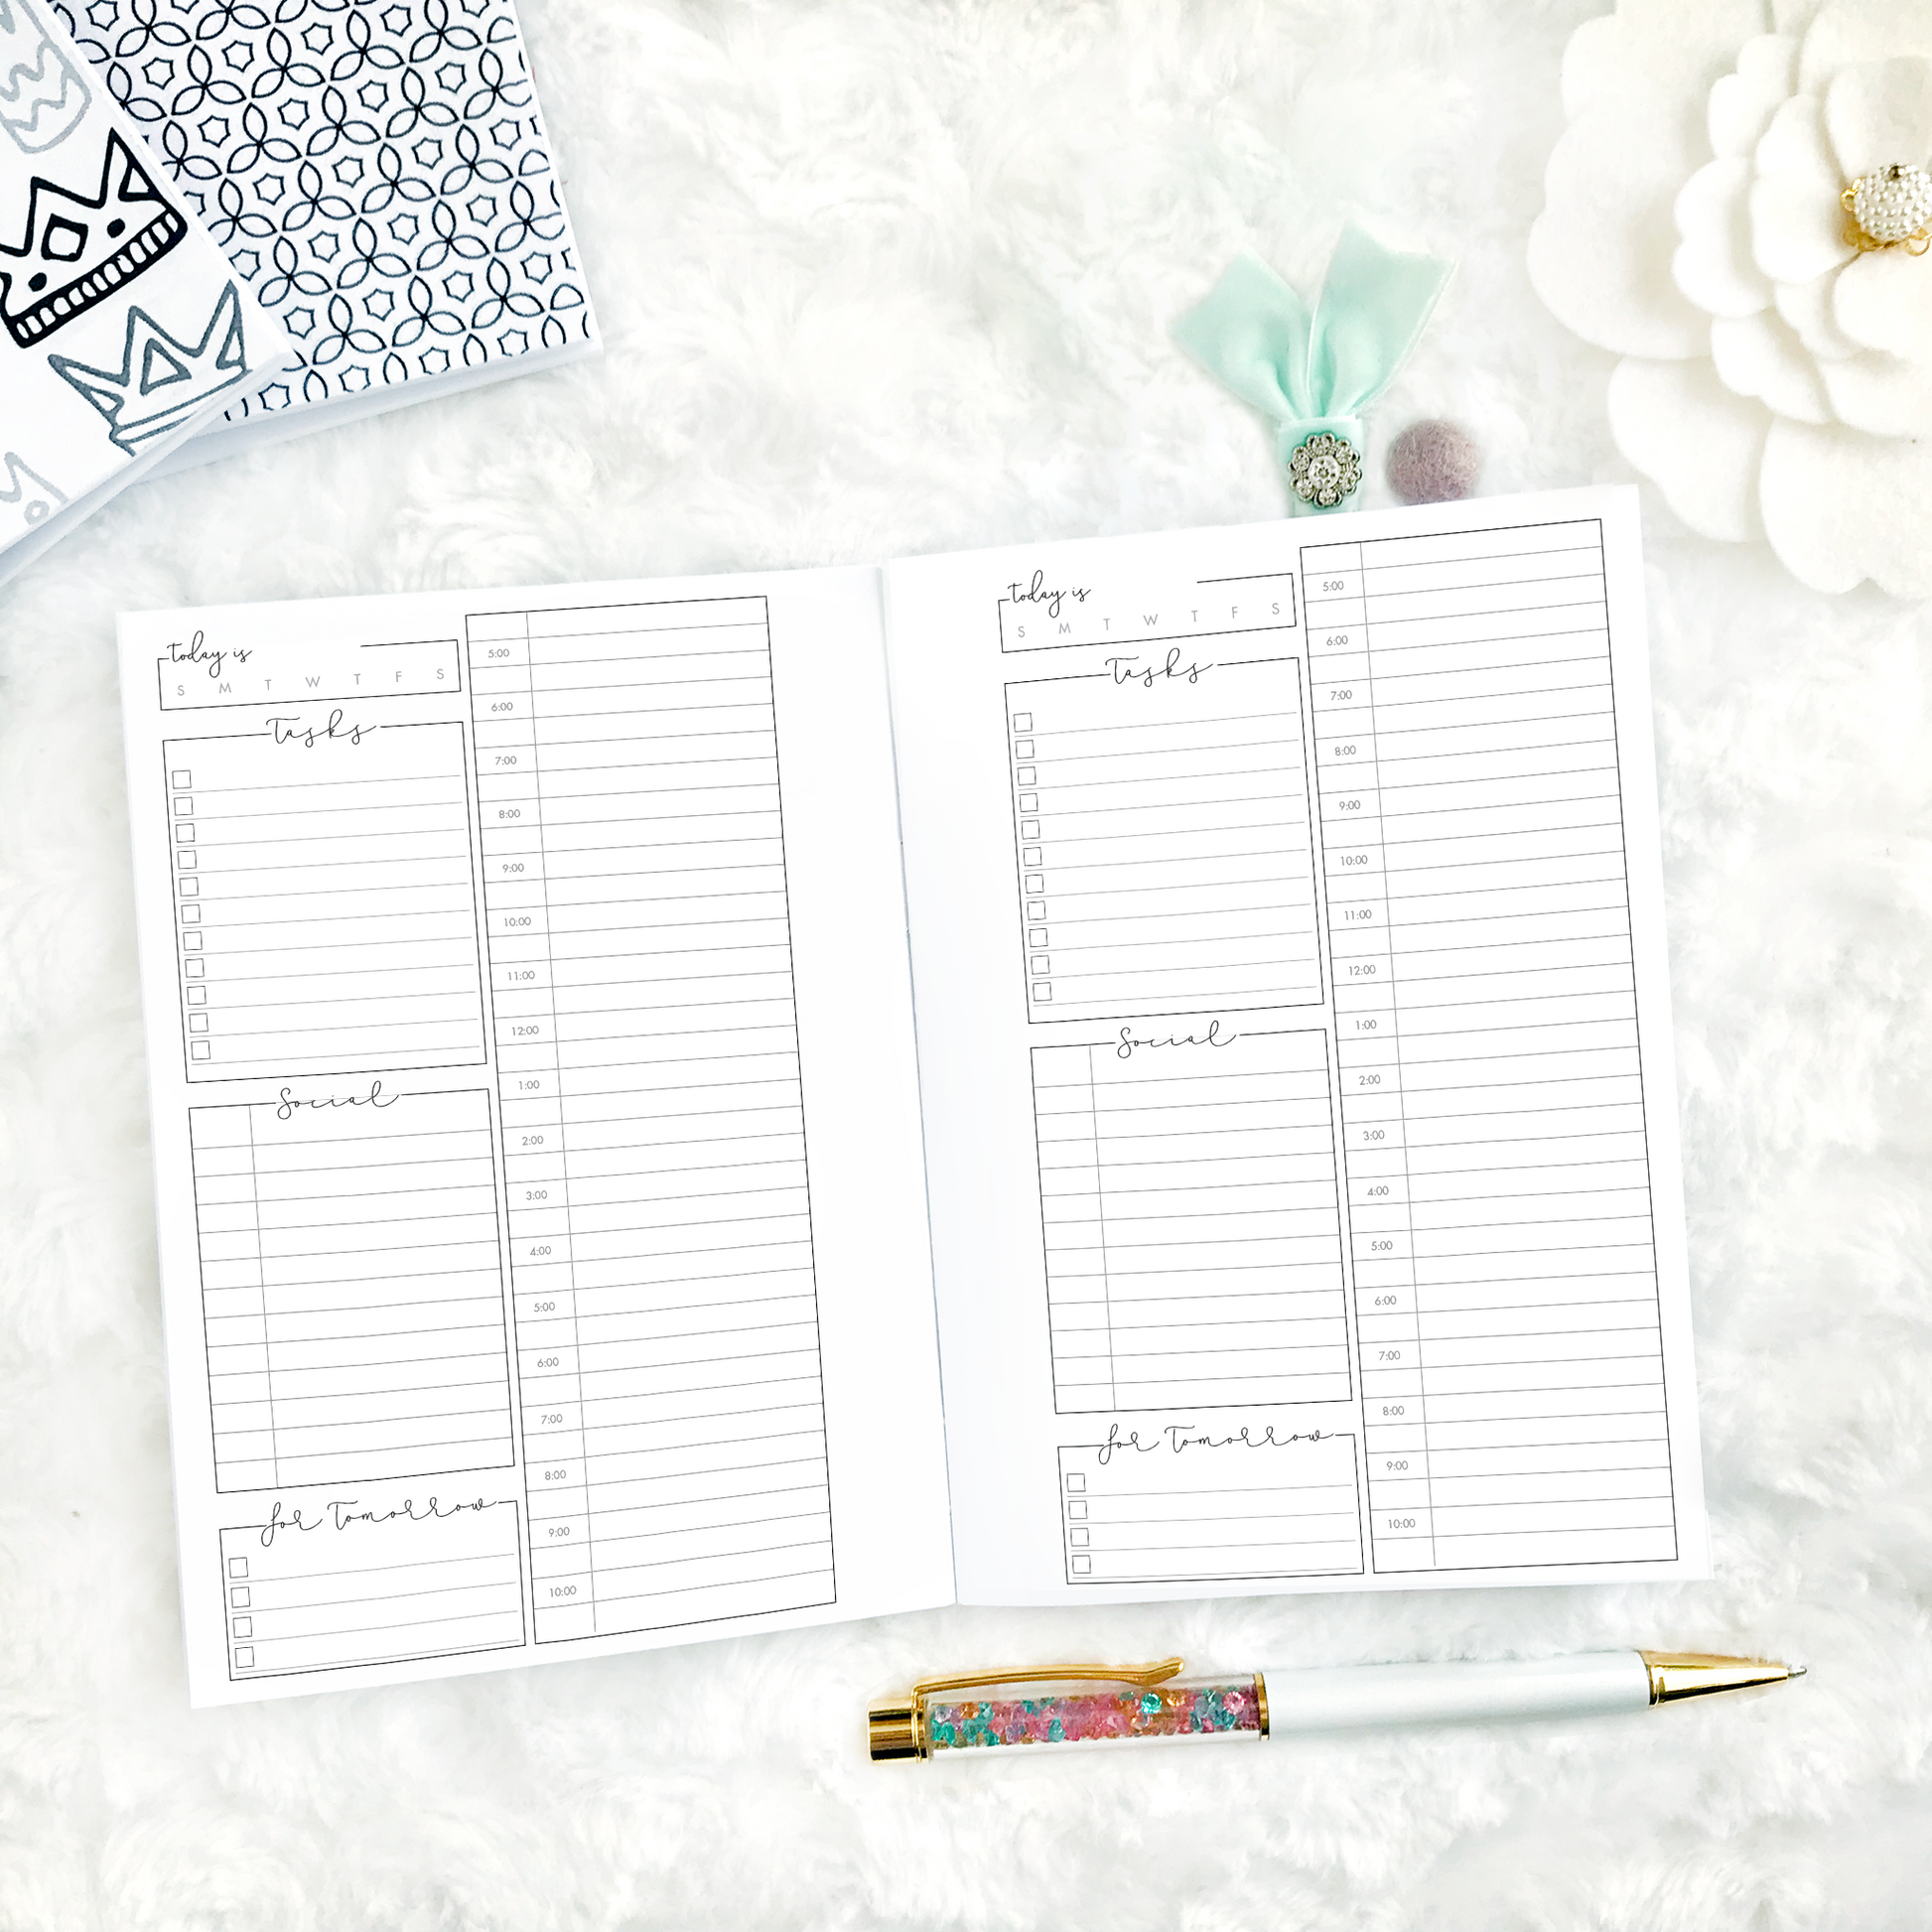 Activity Planner Refill - Personal